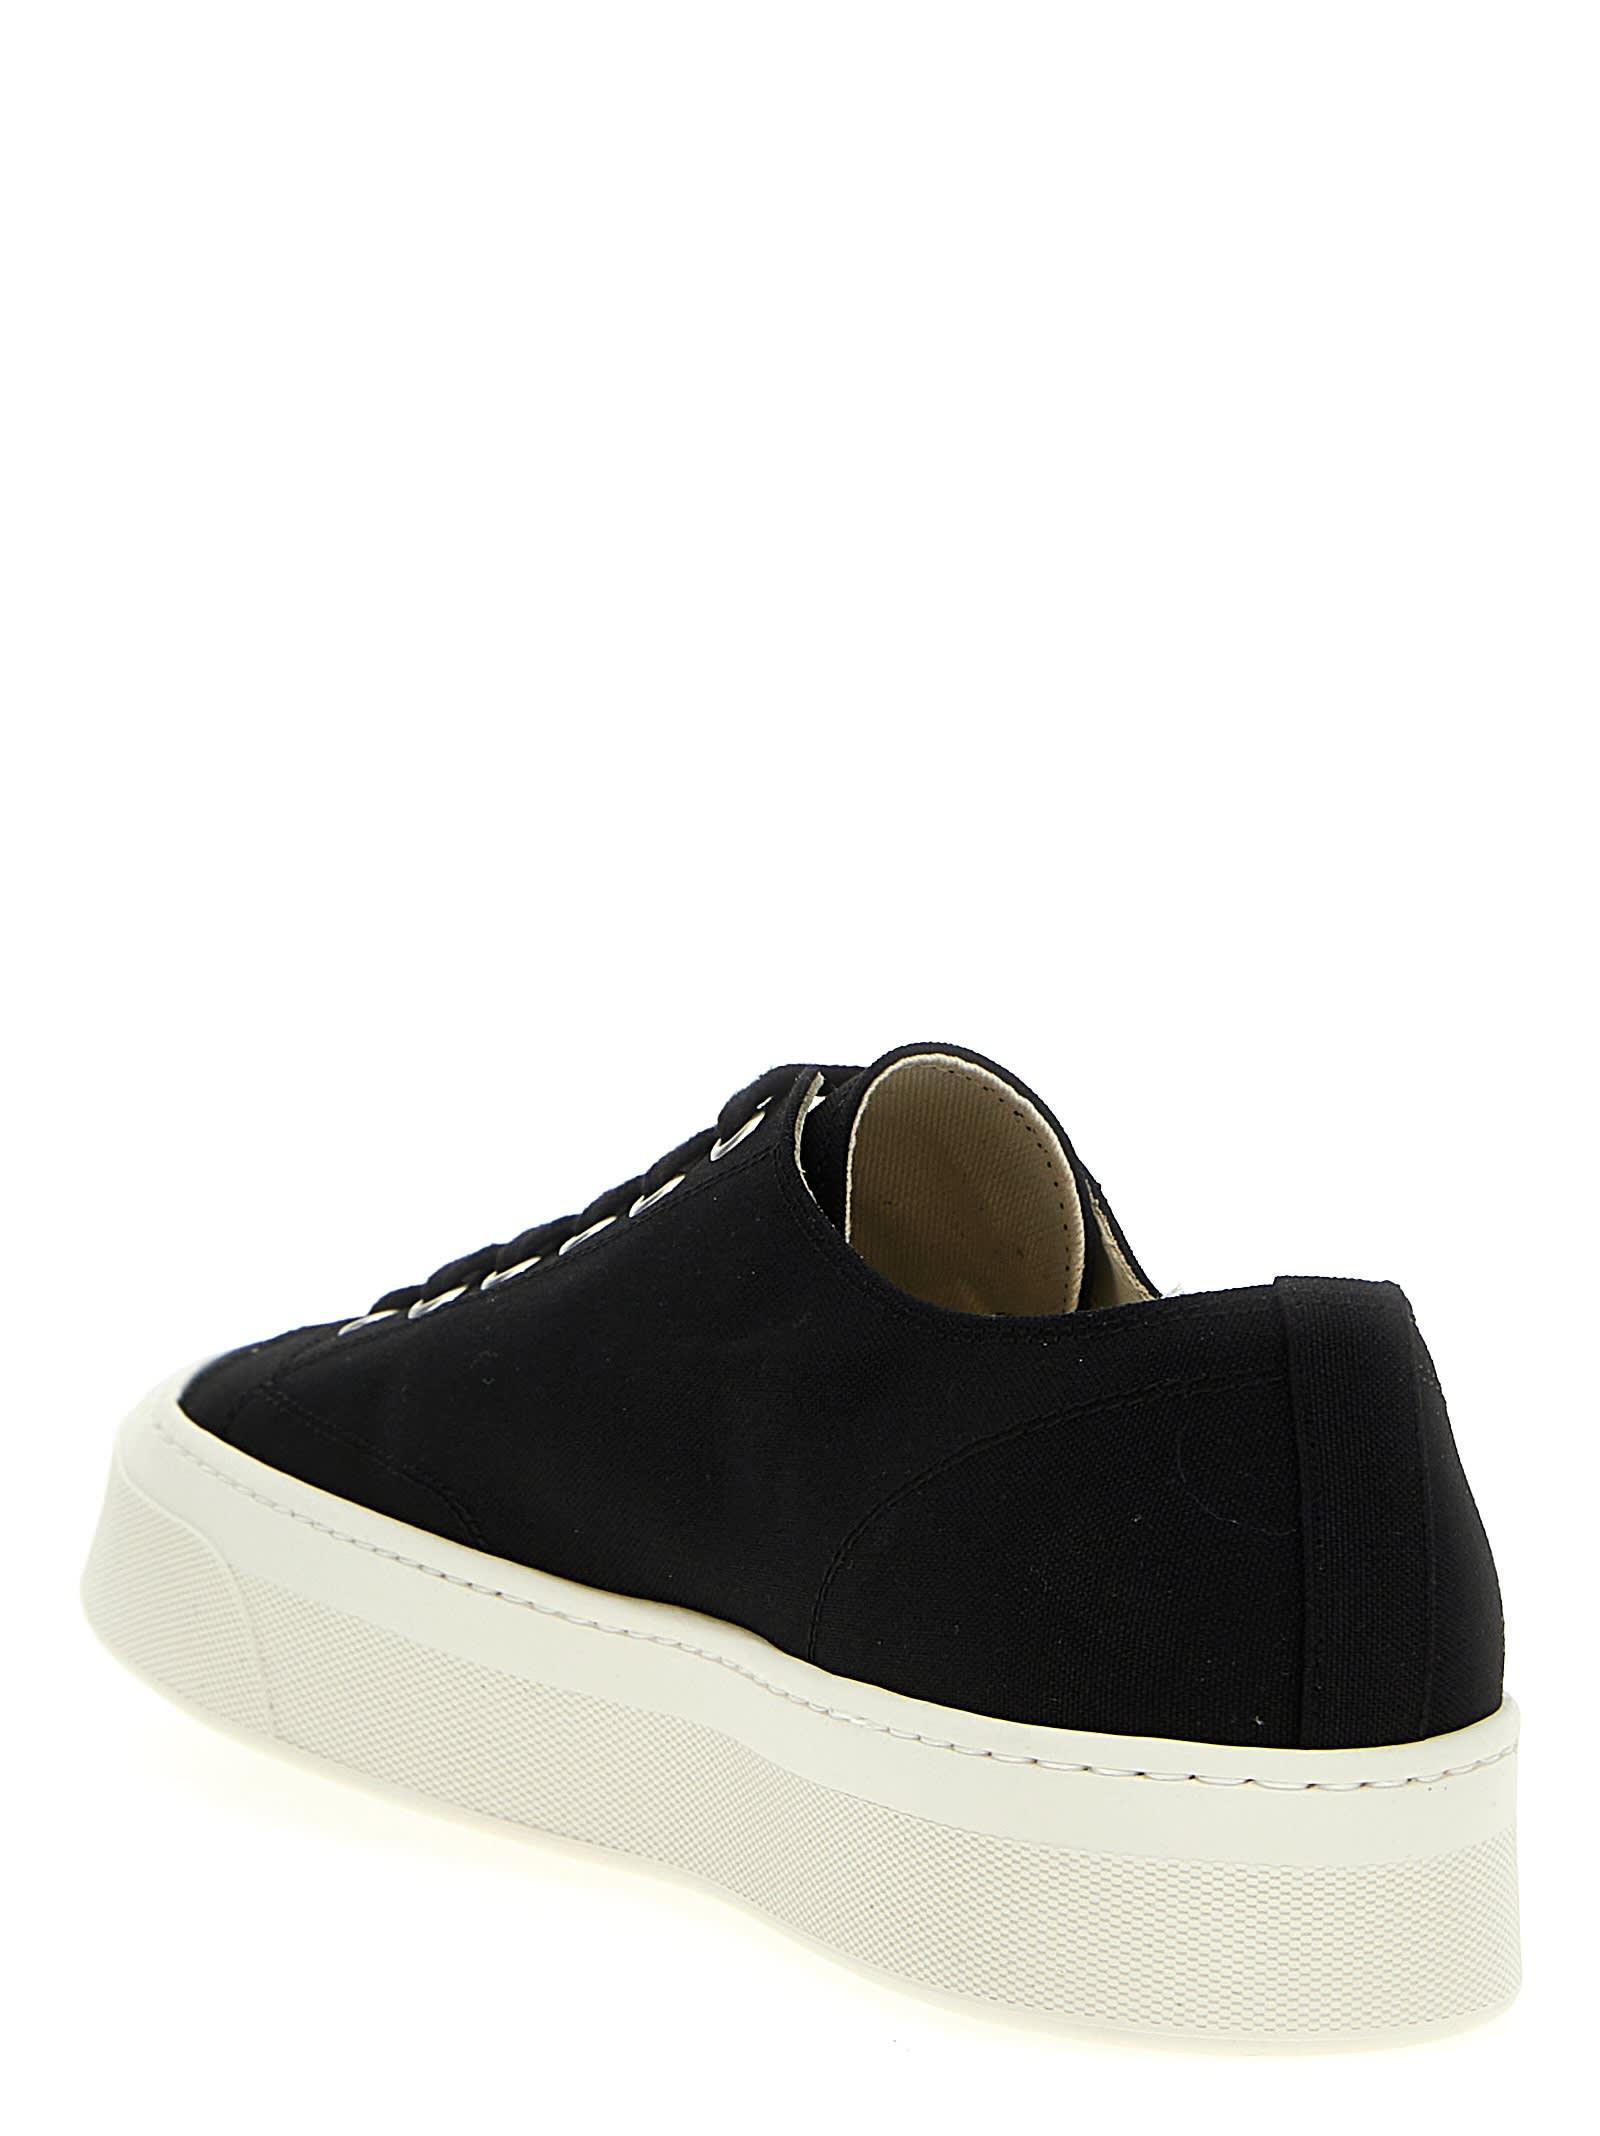 GenesinlifeShops France - ASH Links platform boots Nero - White 'Decades  Low' sneakers Common Projects